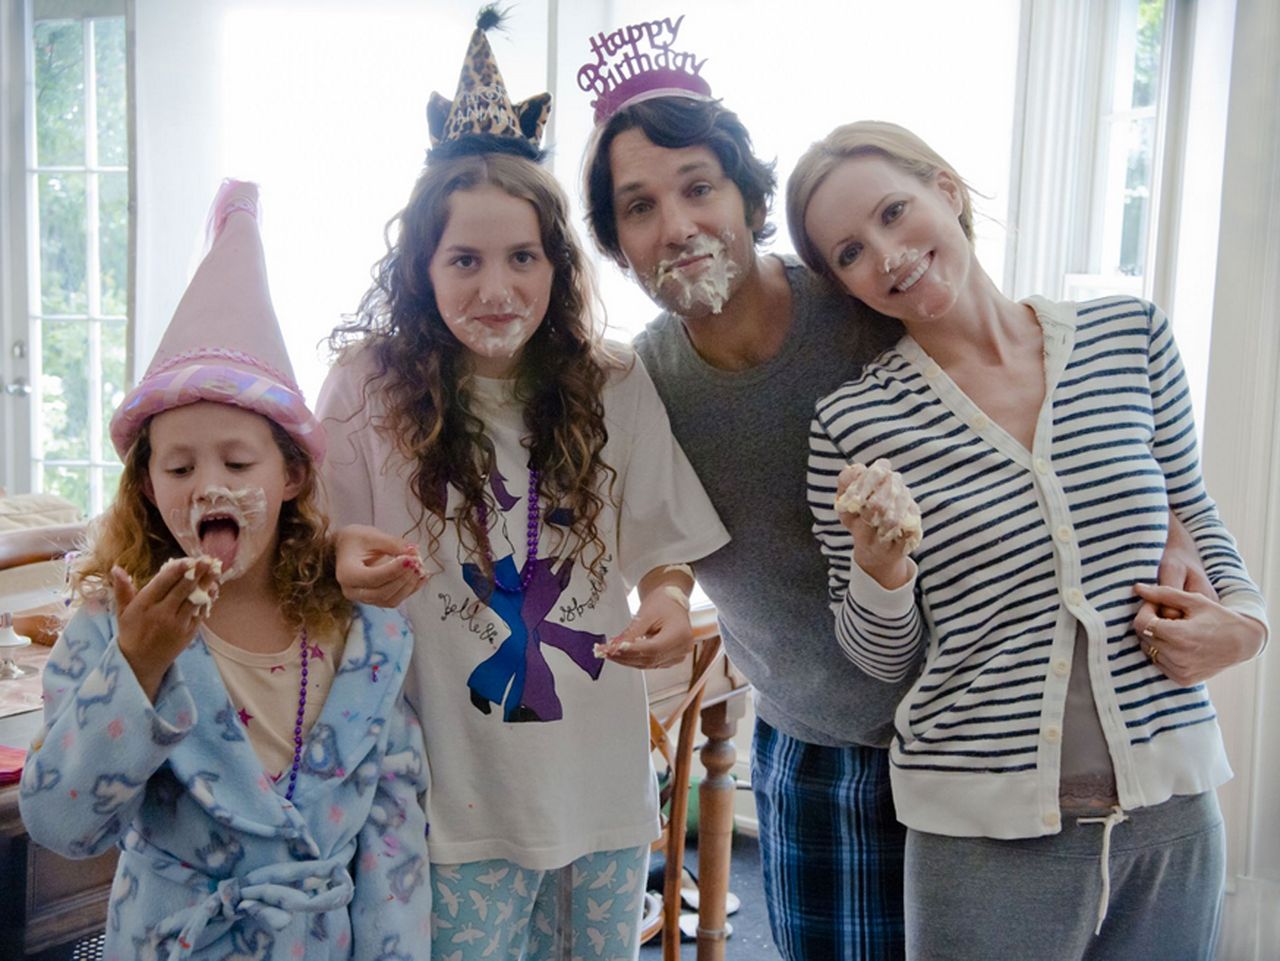 From left: Iris Apatow, Maude Apatow, Rudd and Mann in a promotional photo for "This Is 40."